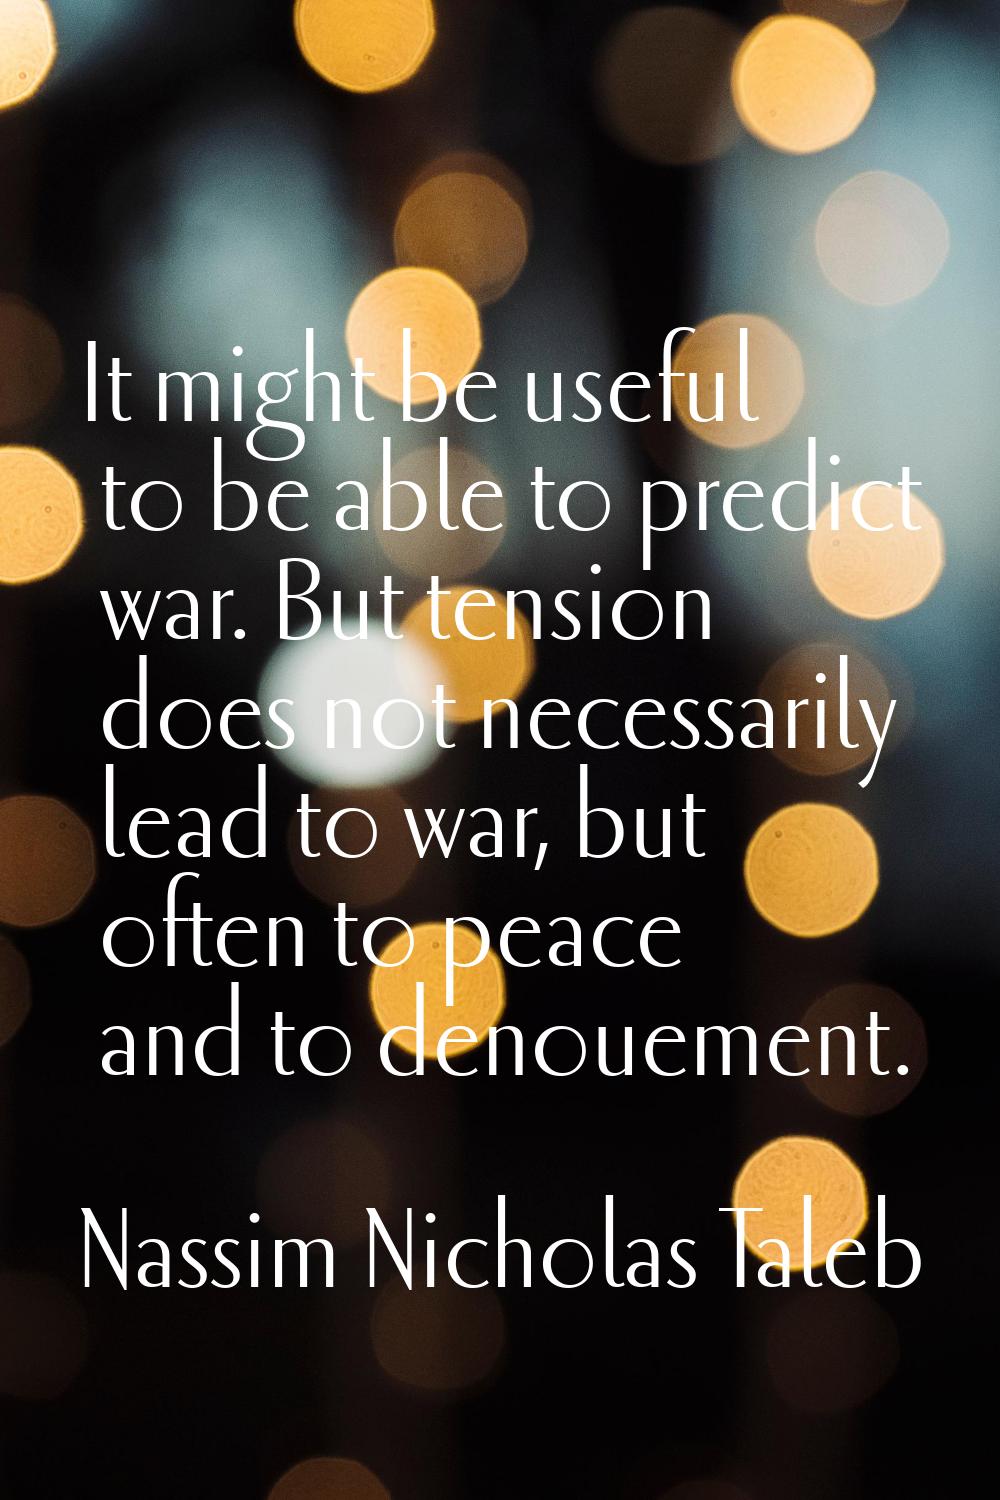 It might be useful to be able to predict war. But tension does not necessarily lead to war, but oft